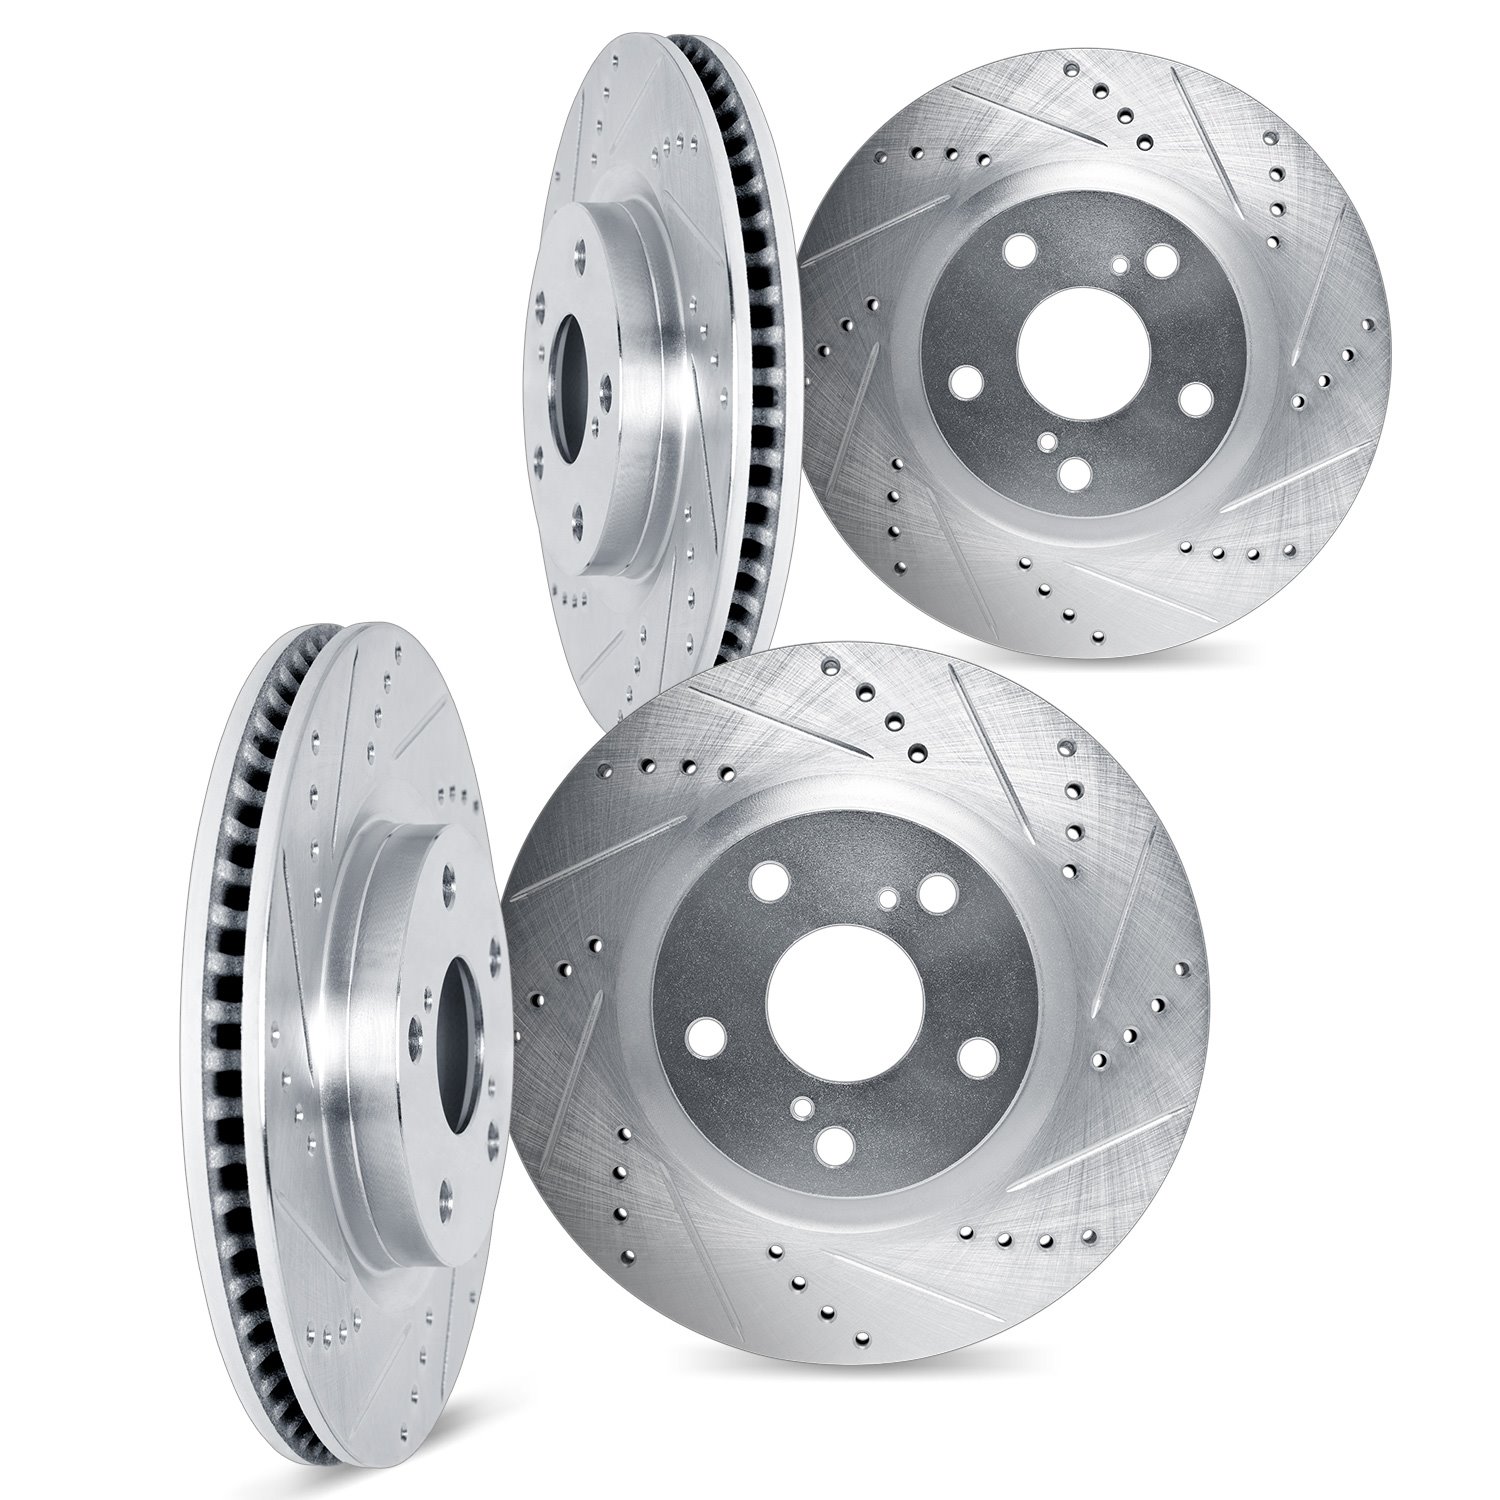 7004-31037 Drilled/Slotted Brake Rotors [Silver], Fits Select Multiple Makes/Models, Position: Front and Rear